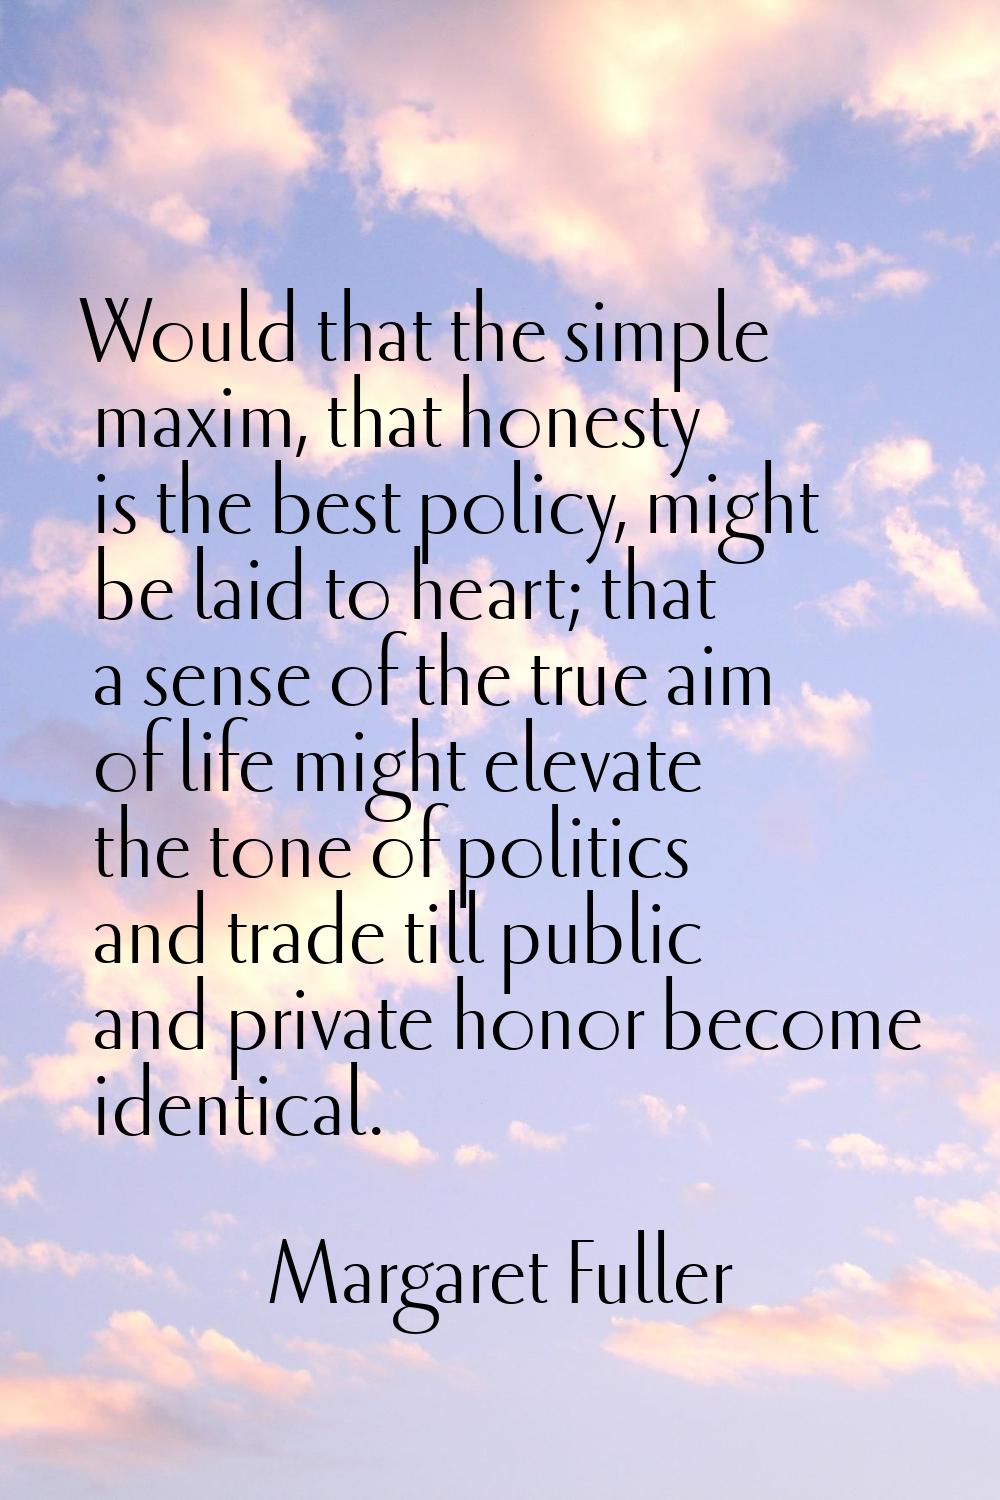 Would that the simple maxim, that honesty is the best policy, might be laid to heart; that a sense 